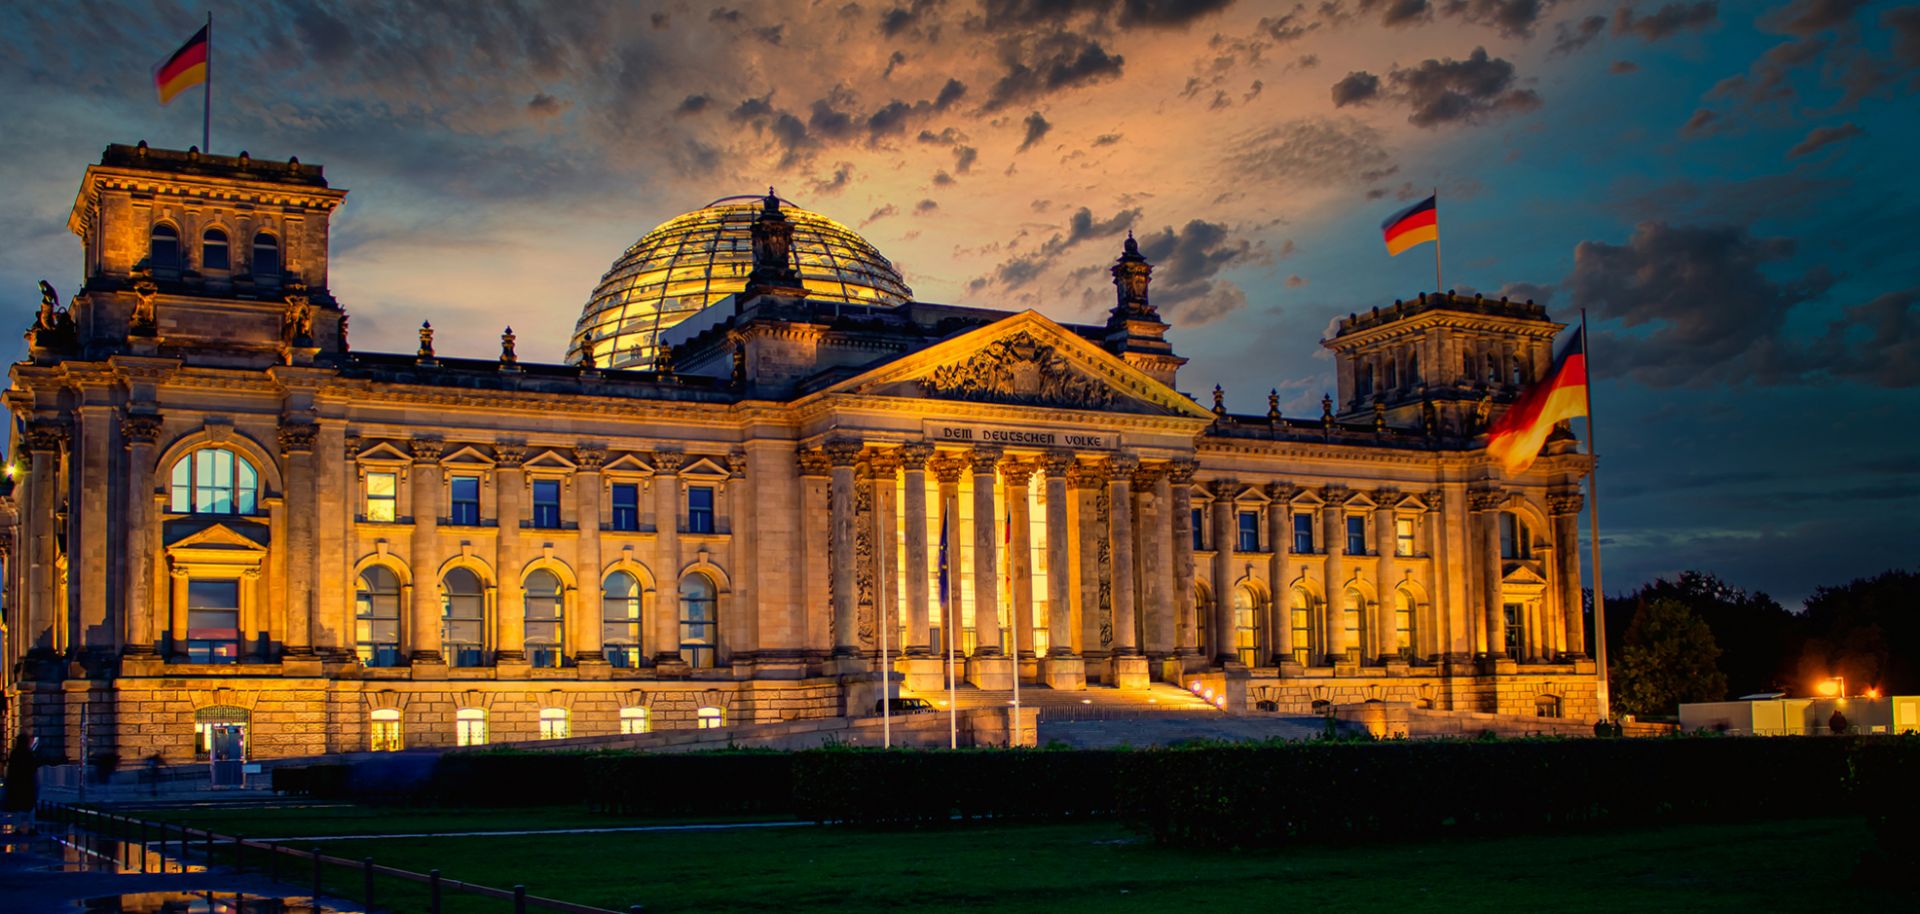 The Bundestag, Germany's federal parliament, is seen at night.